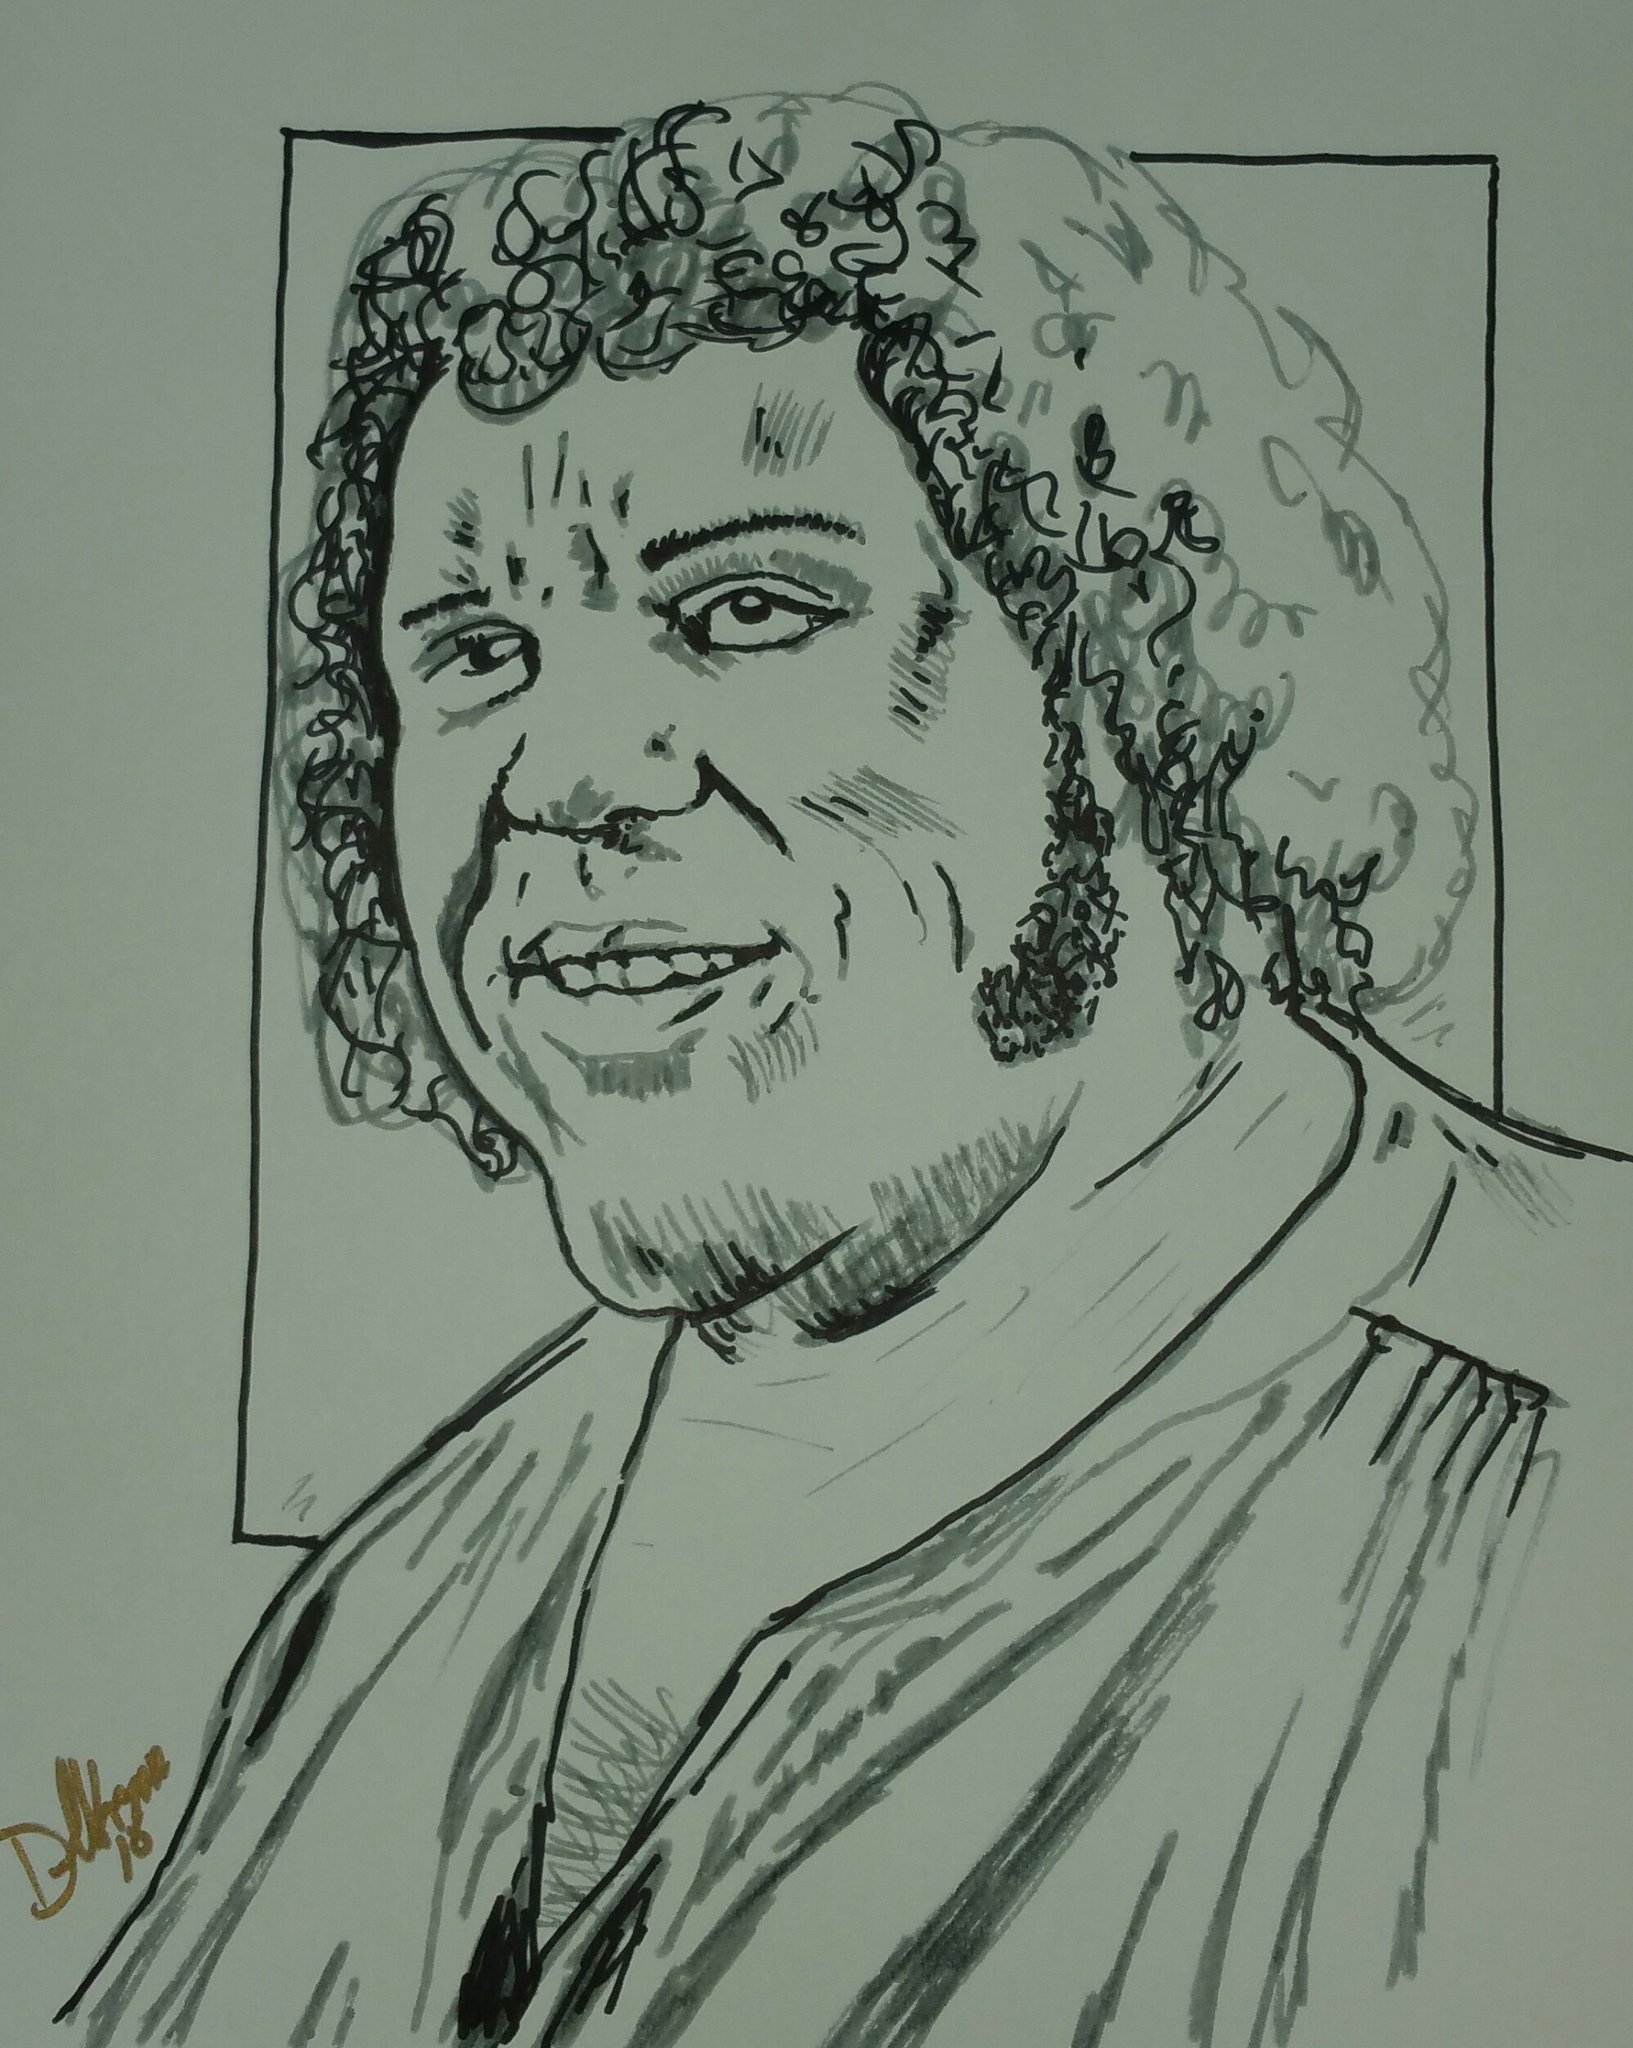 Happy birthday to Andre the Giant! 